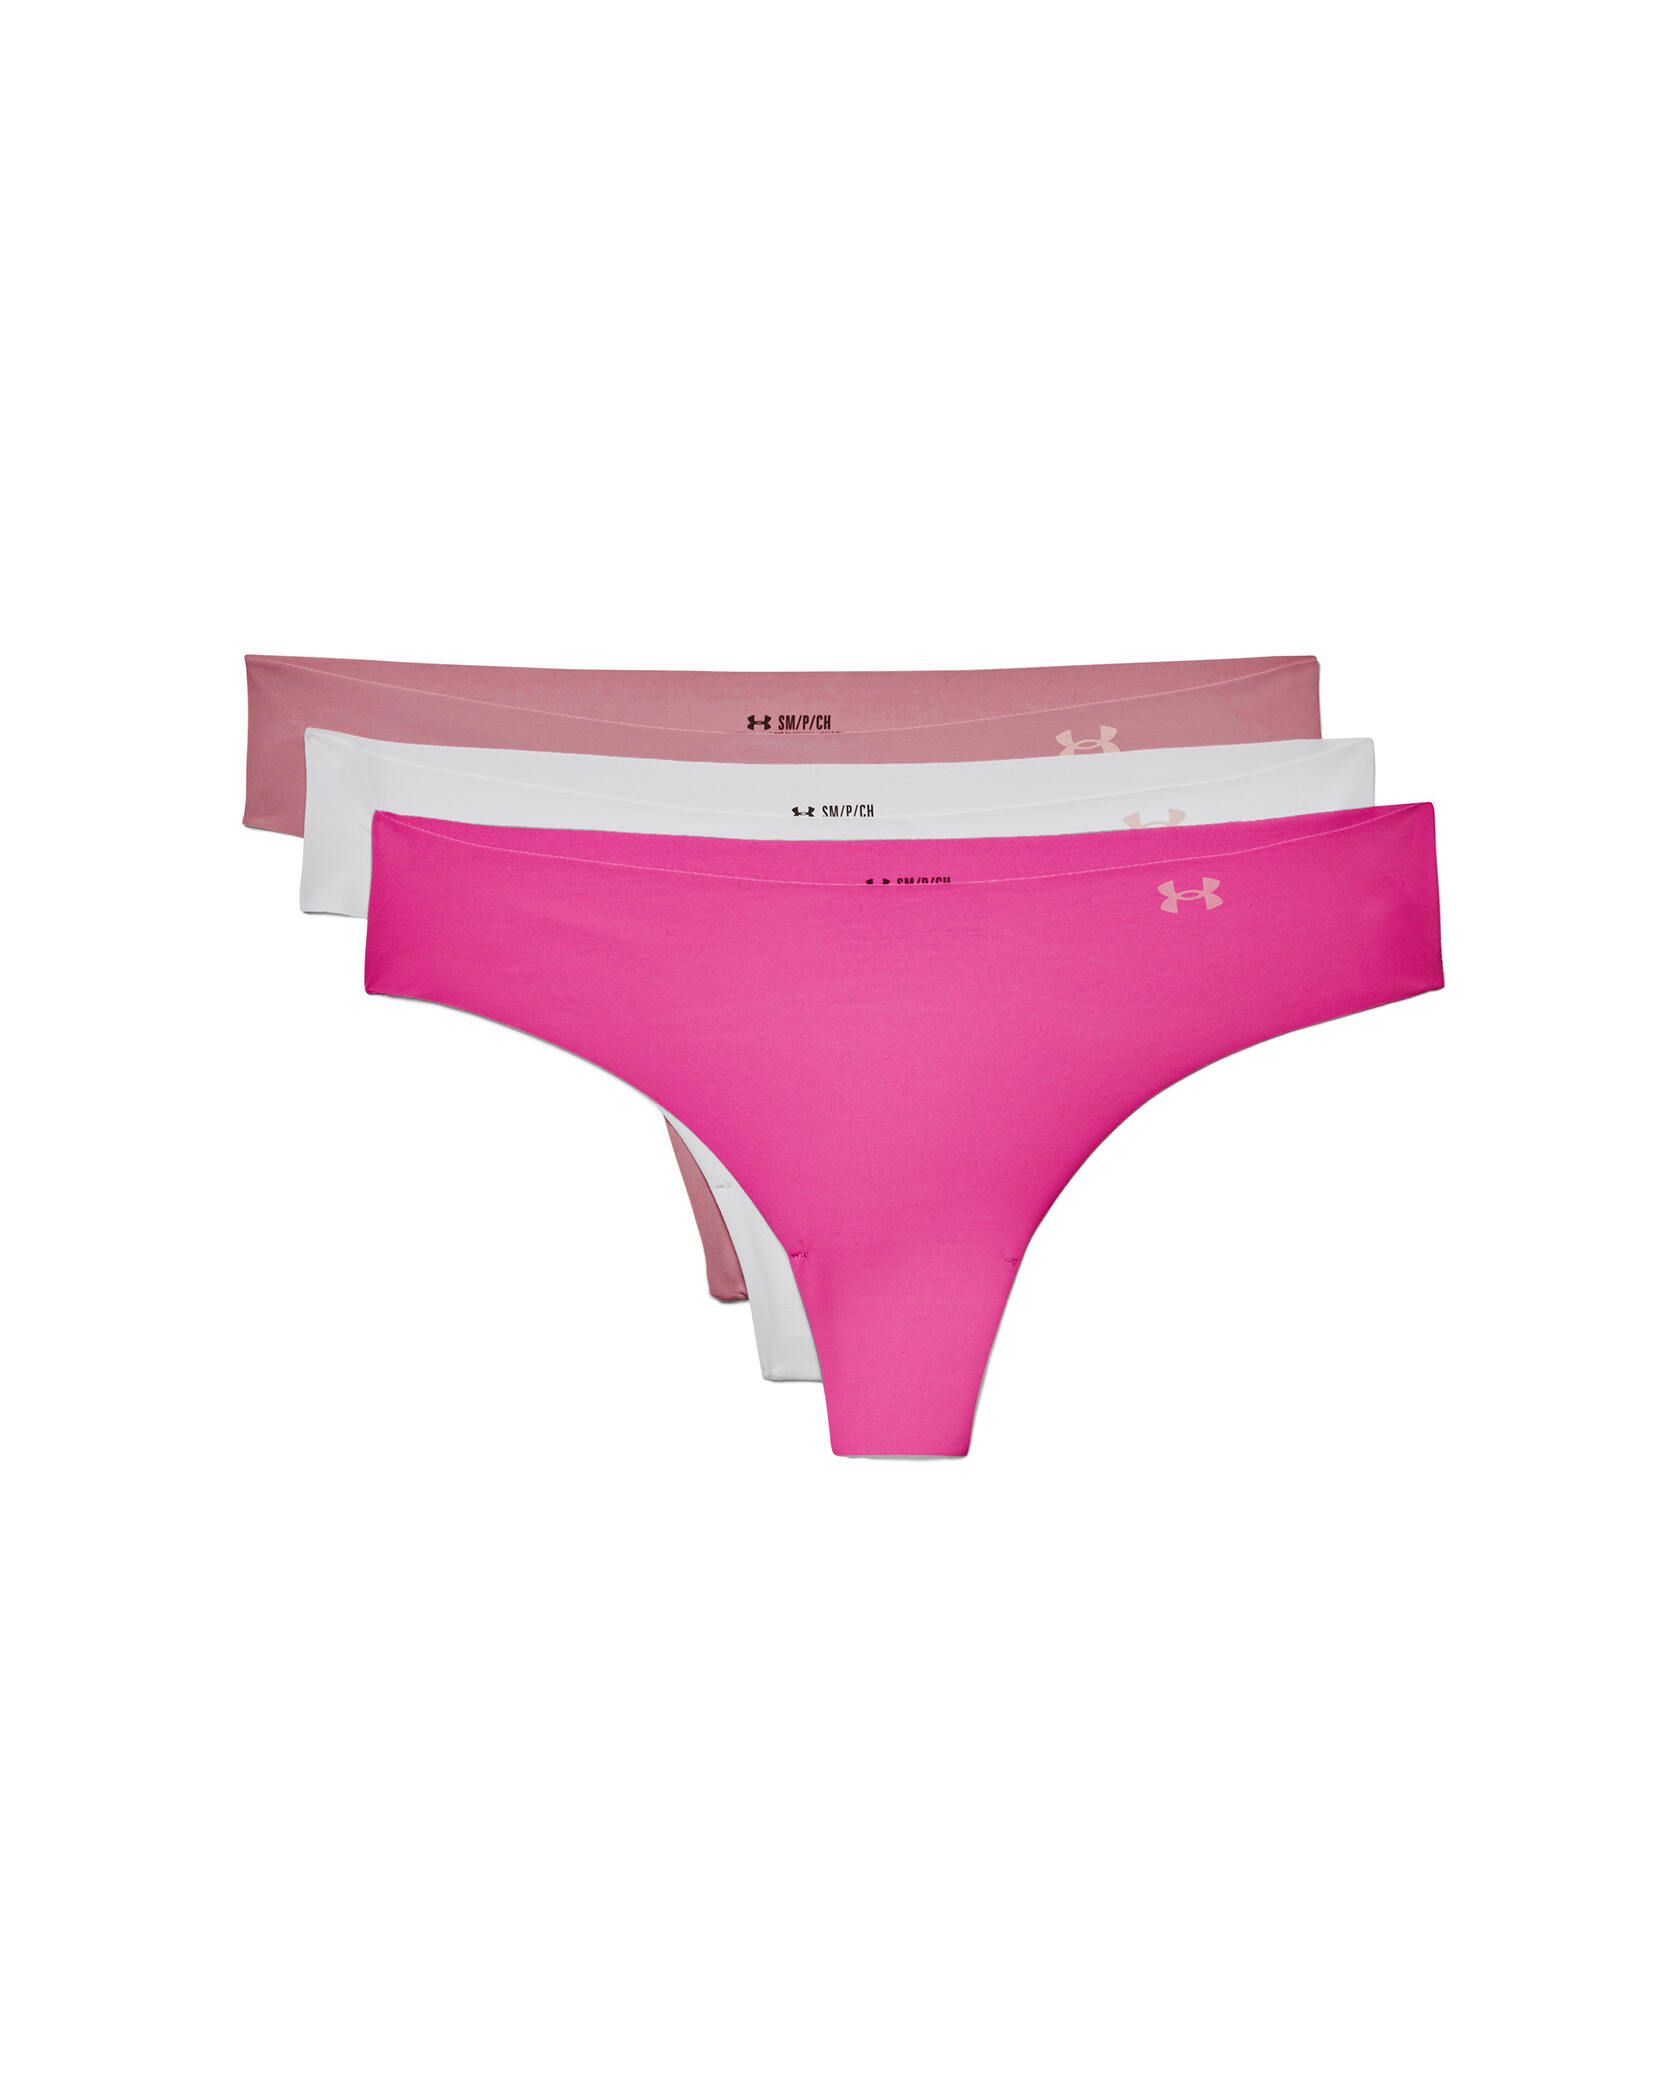 G-String Thong at Rs 100/piece, New Items in New Delhi